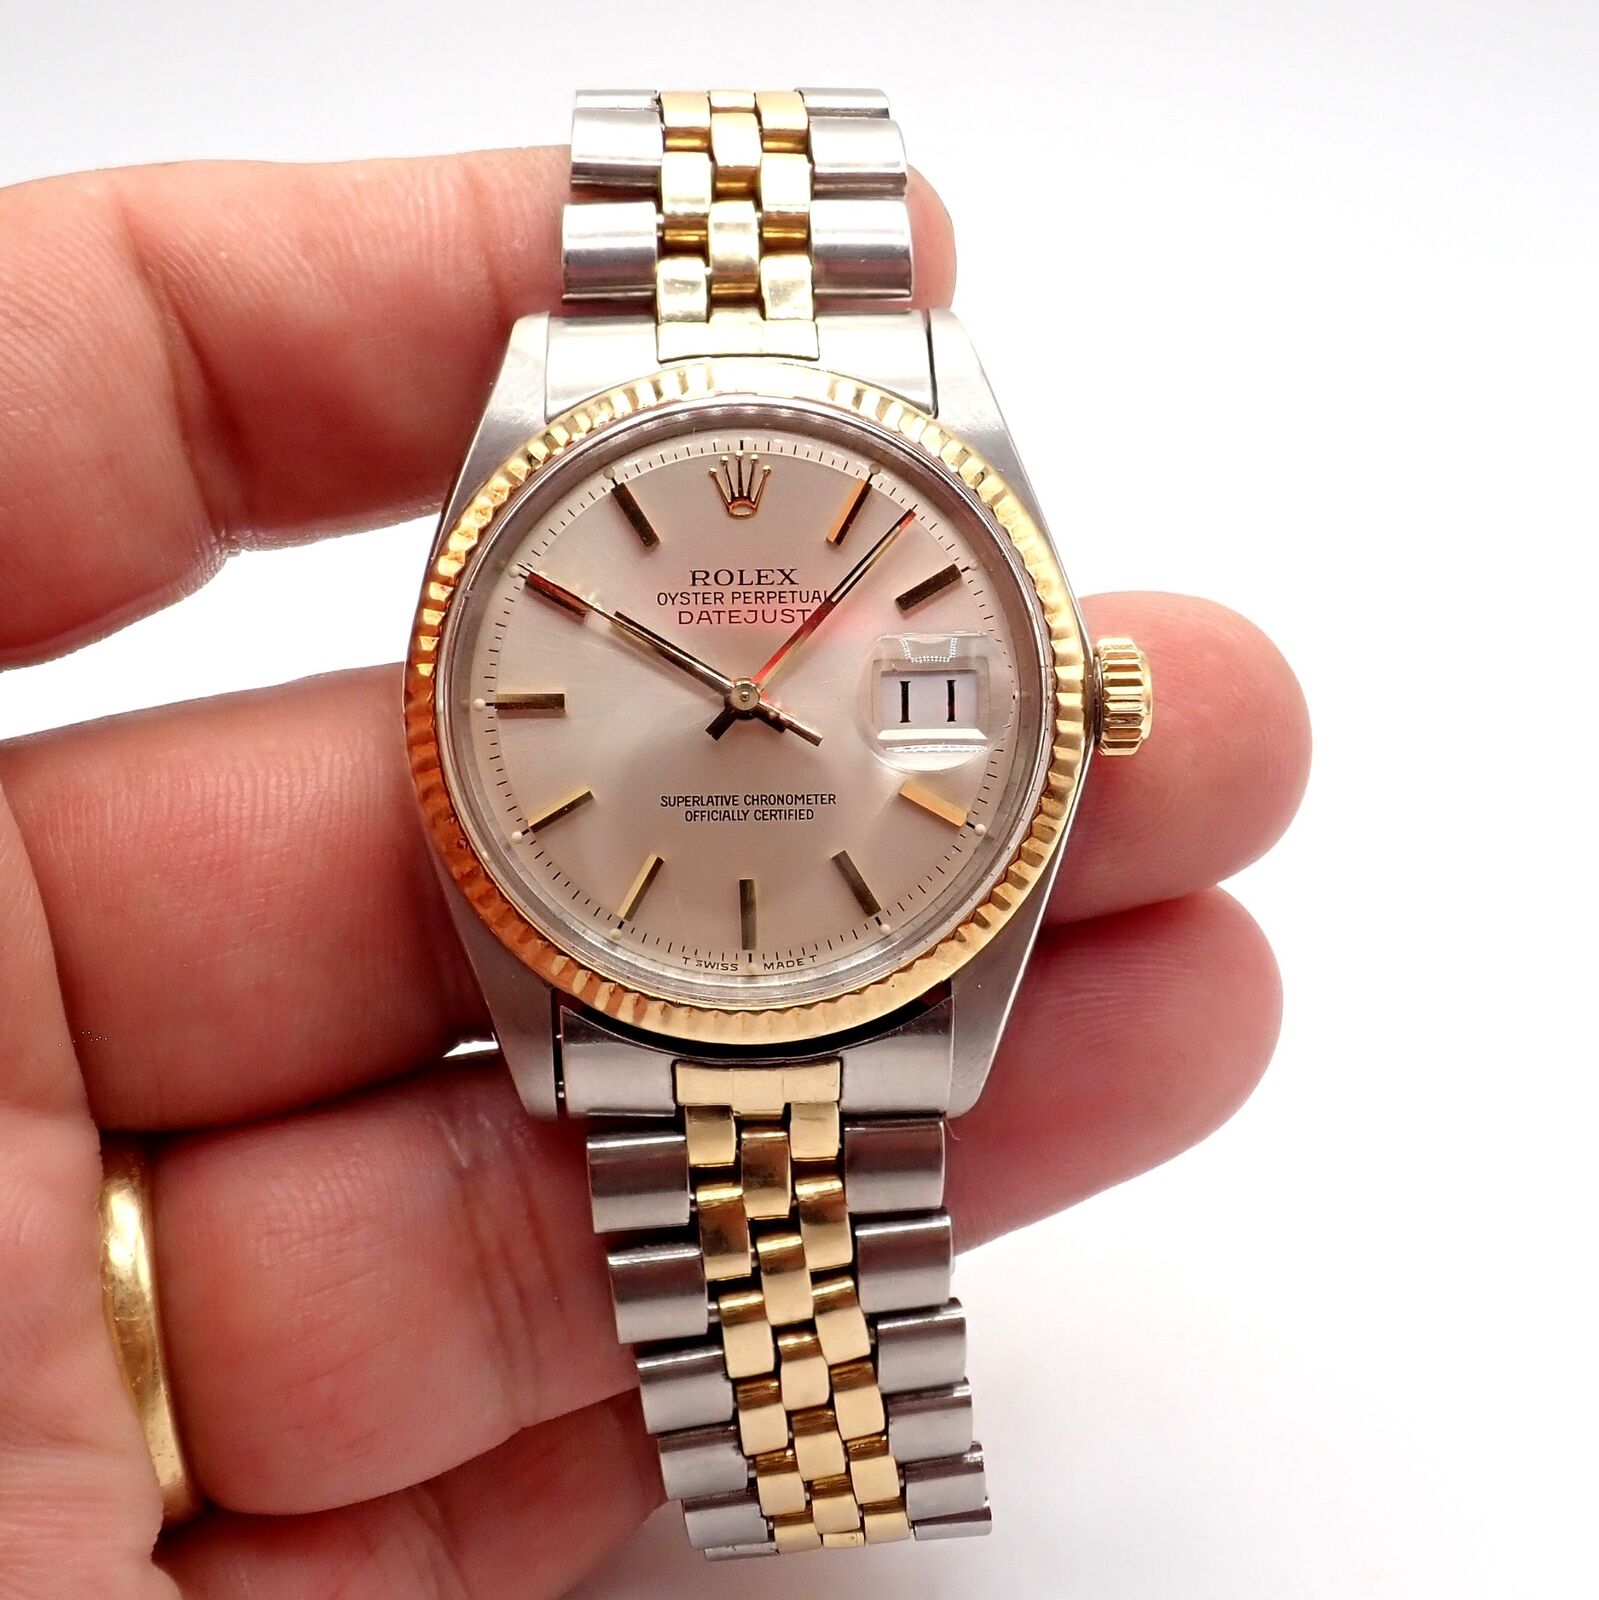 Rolex Jewelry & Watches:Watches, Parts & Accessories:Watches:Wristwatches Rolex Oyster Perpetual Watch Datejust 36mm Stainless 18K Gold Jubilee Band Mens